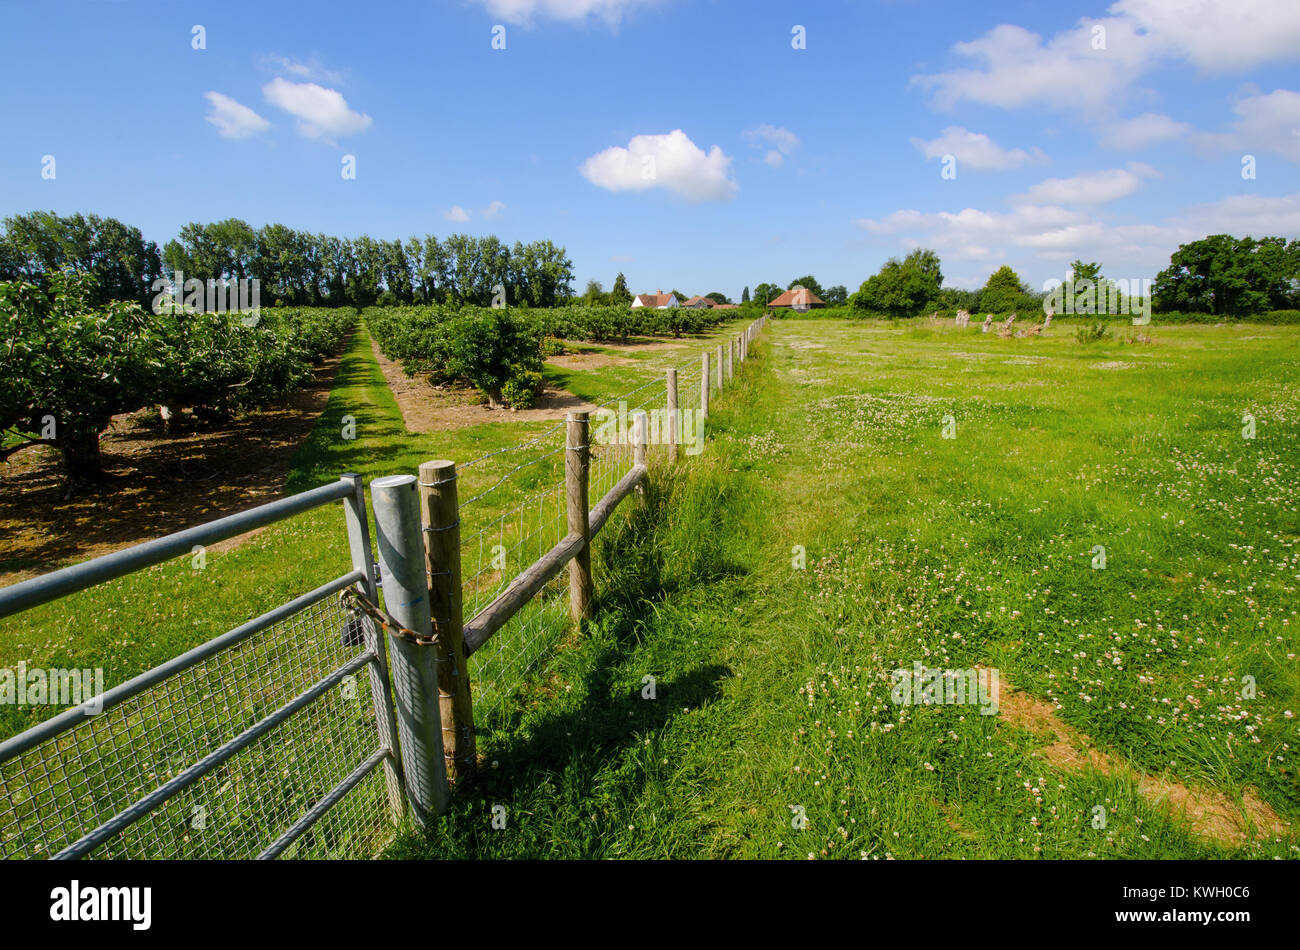 Boughton Monchelsea village, Kent, England. Fields, trees and fence. Stock Photo